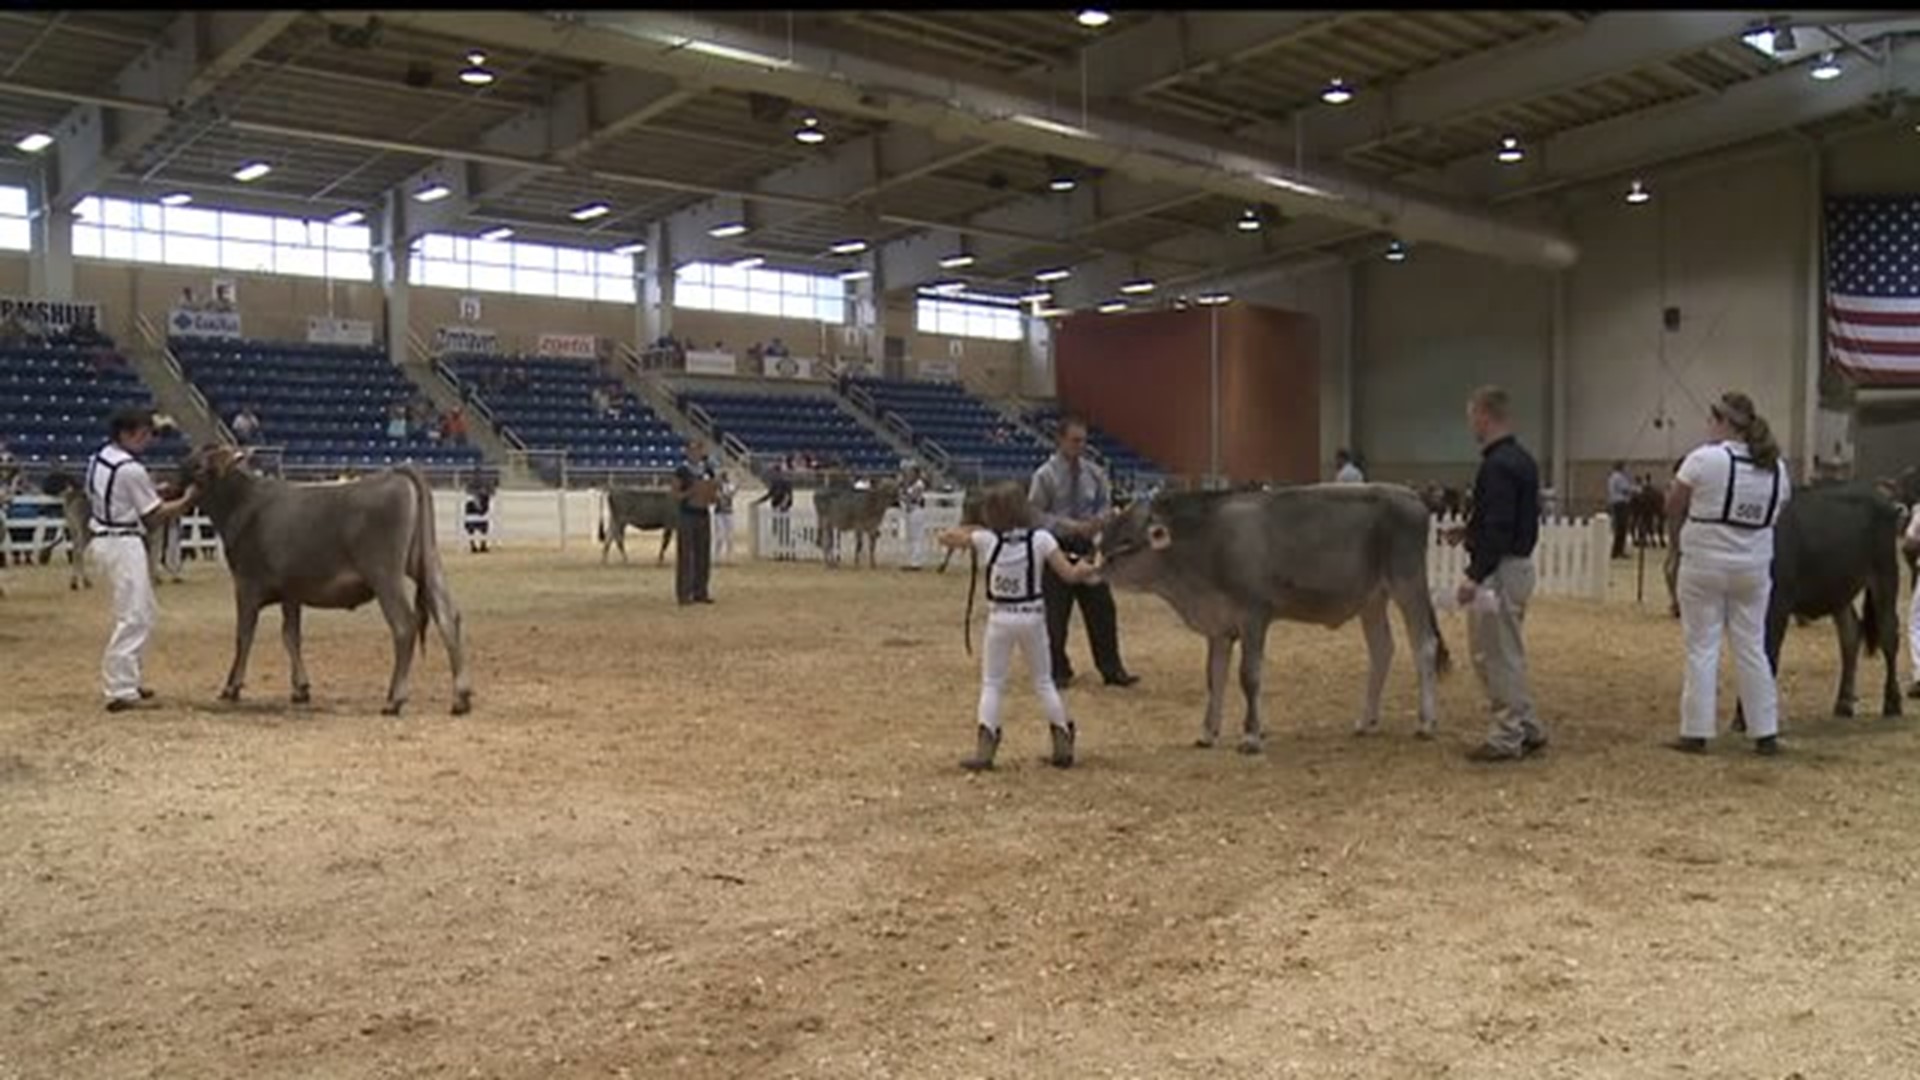 All American Dairy Show brings thousands of cows to Harrisburg